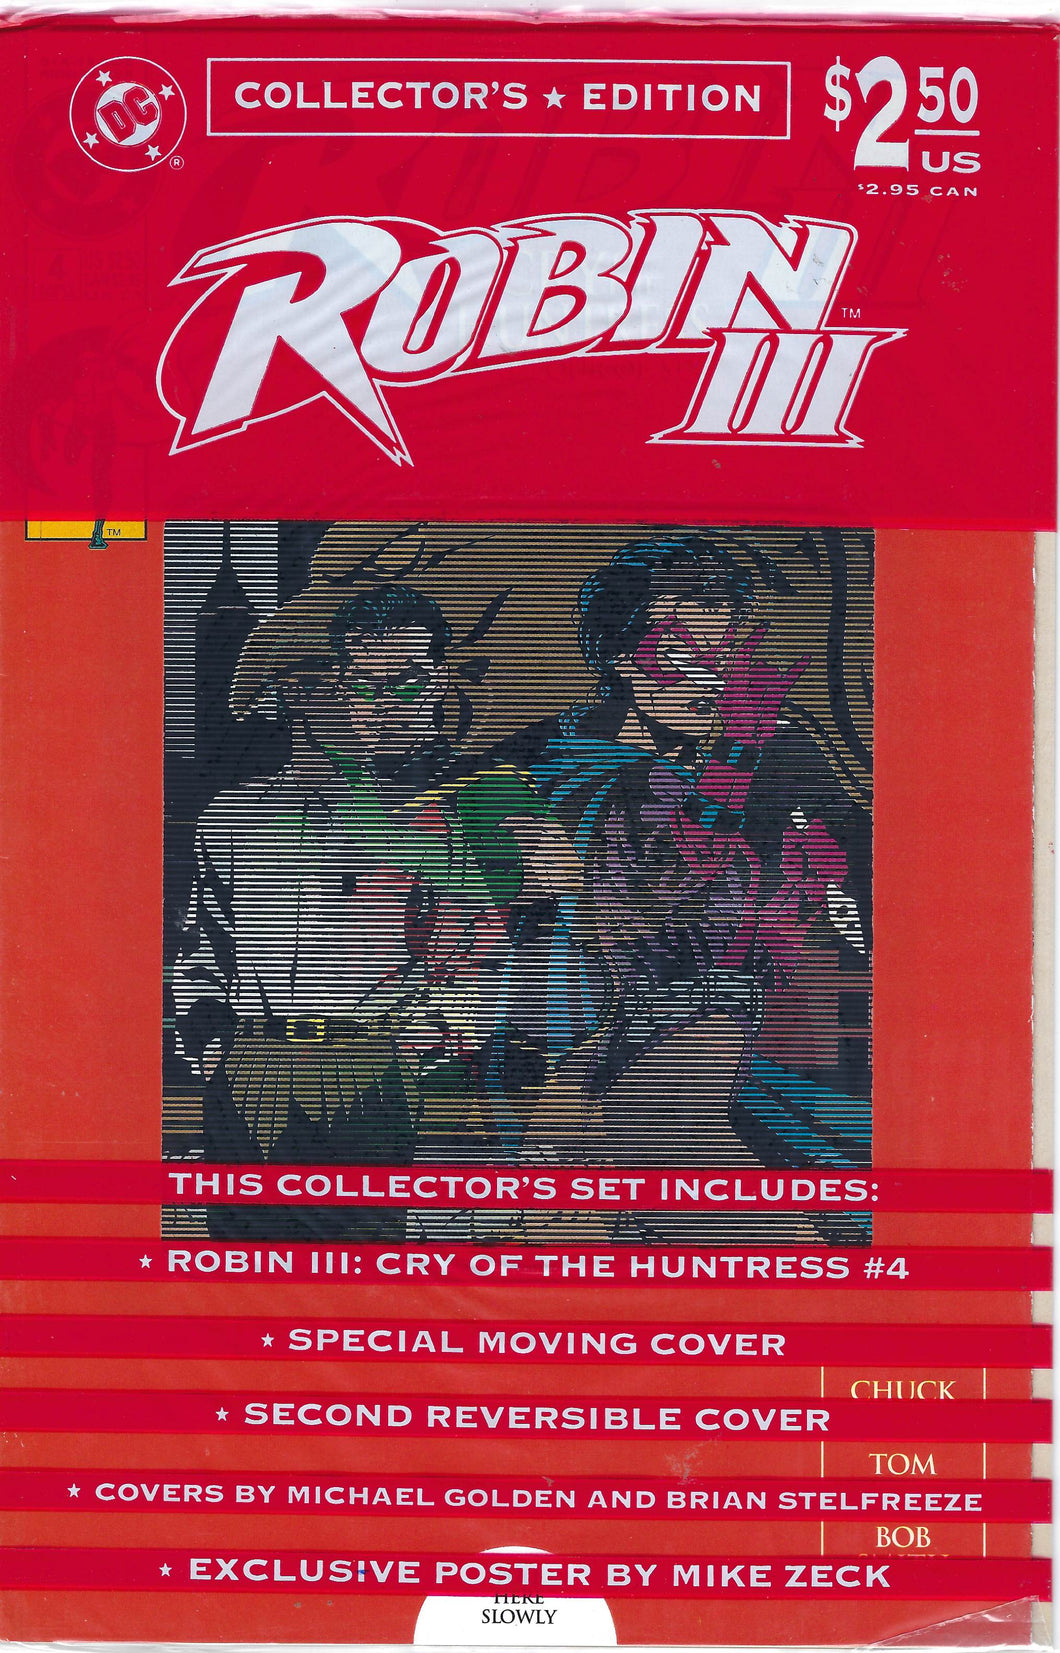 Robin III : Cry of the Huntress #4 (in sealed polybag)